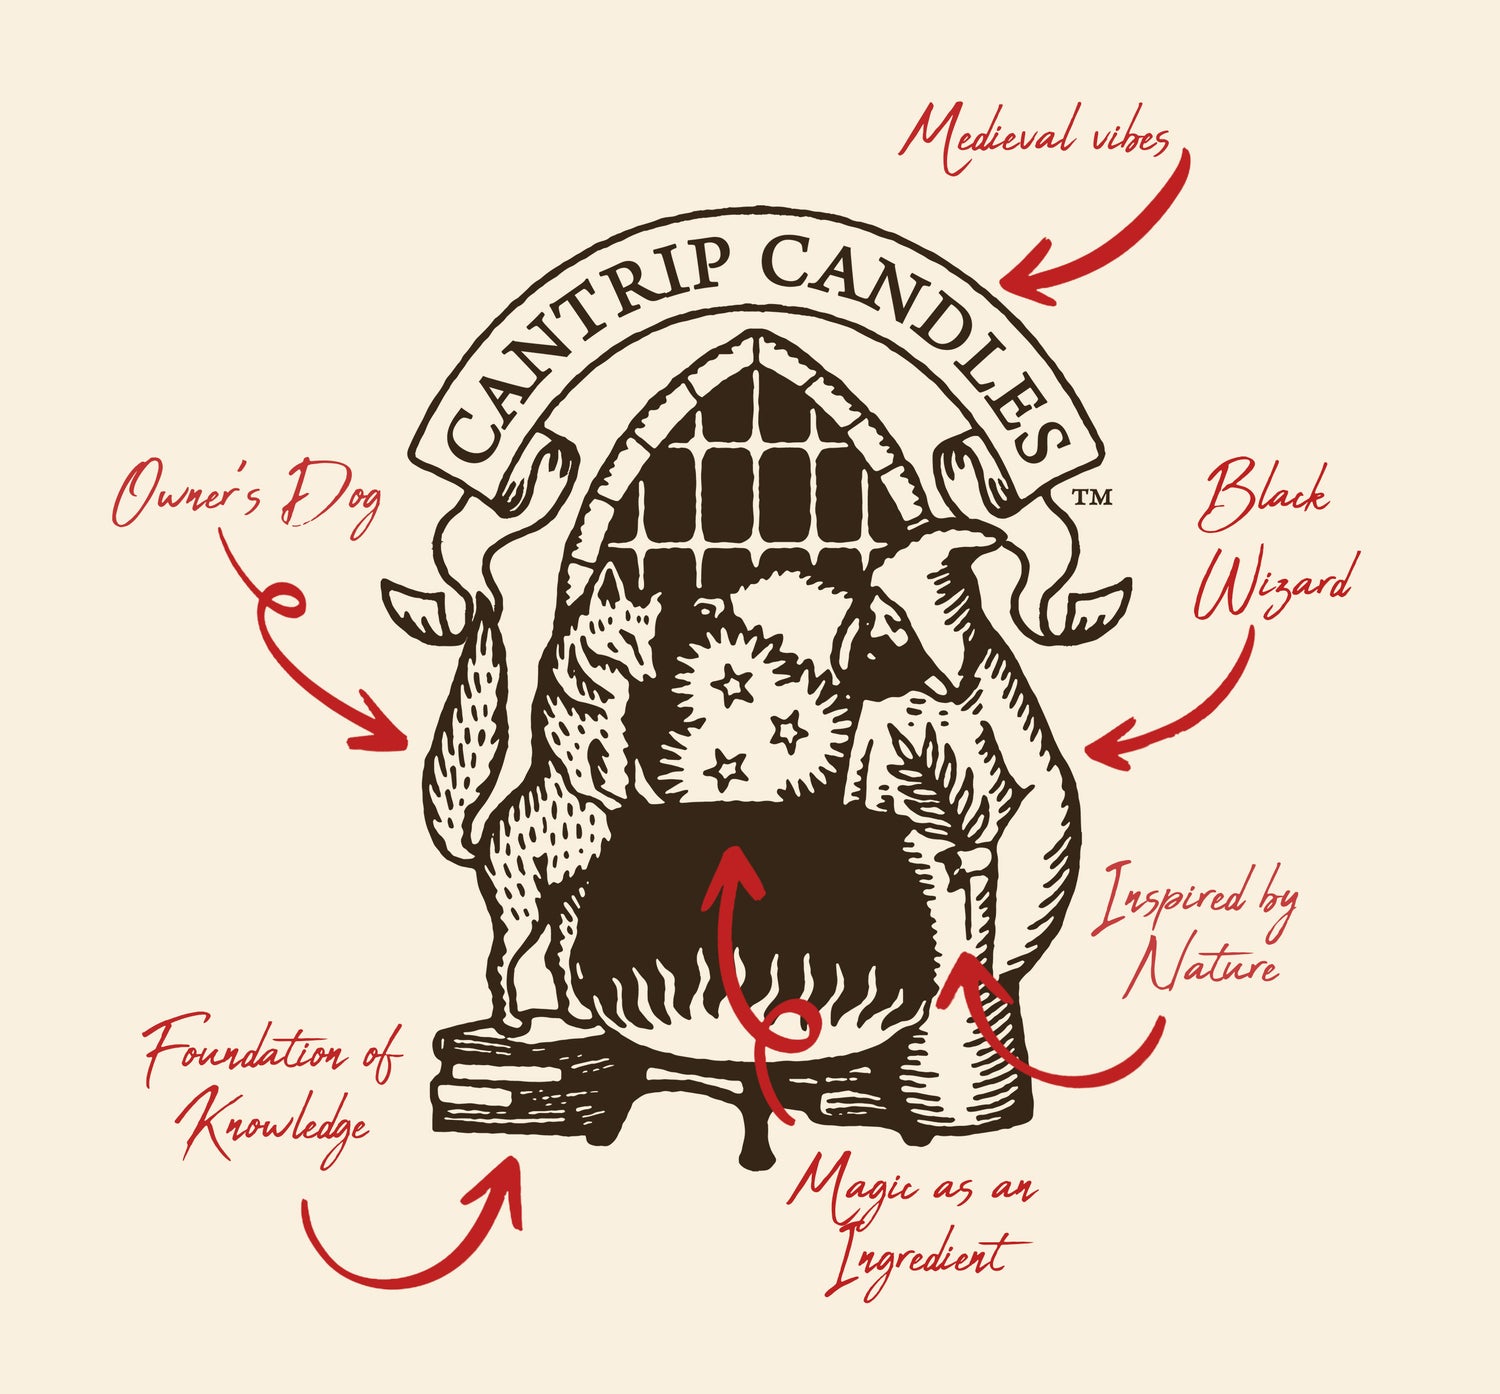 Cantrip Candles logo with artistic notation